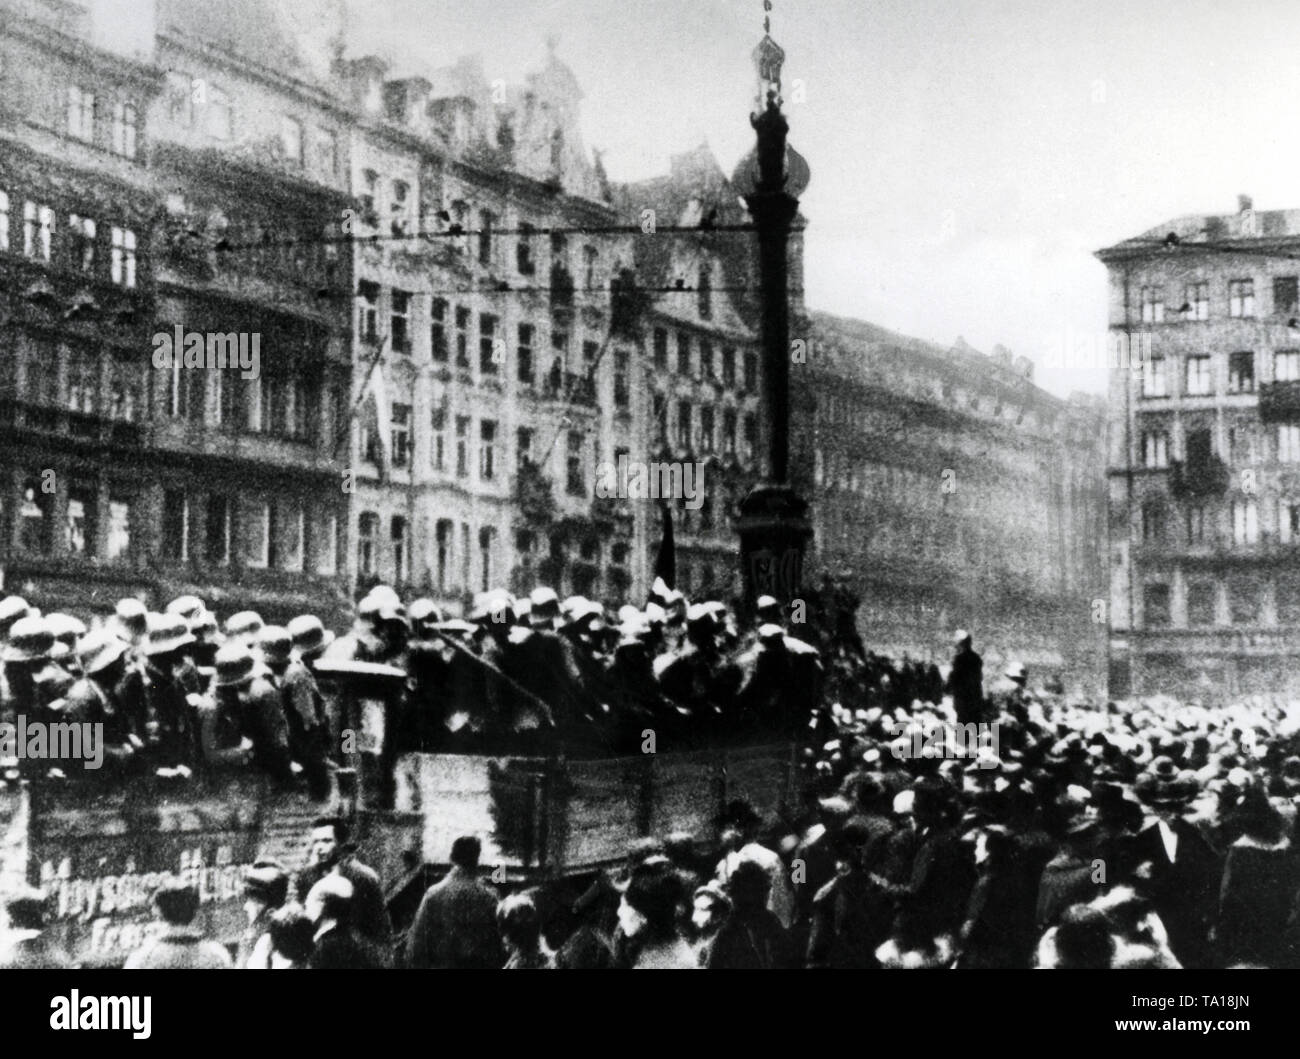 Members of a Freising SA unit stand on trucks at Marienplatz and listen to a speech of Julius Streicher (standing, below the Mariensaeule). The trucks and the speaker are surrounded by a crowd. Stock Photo